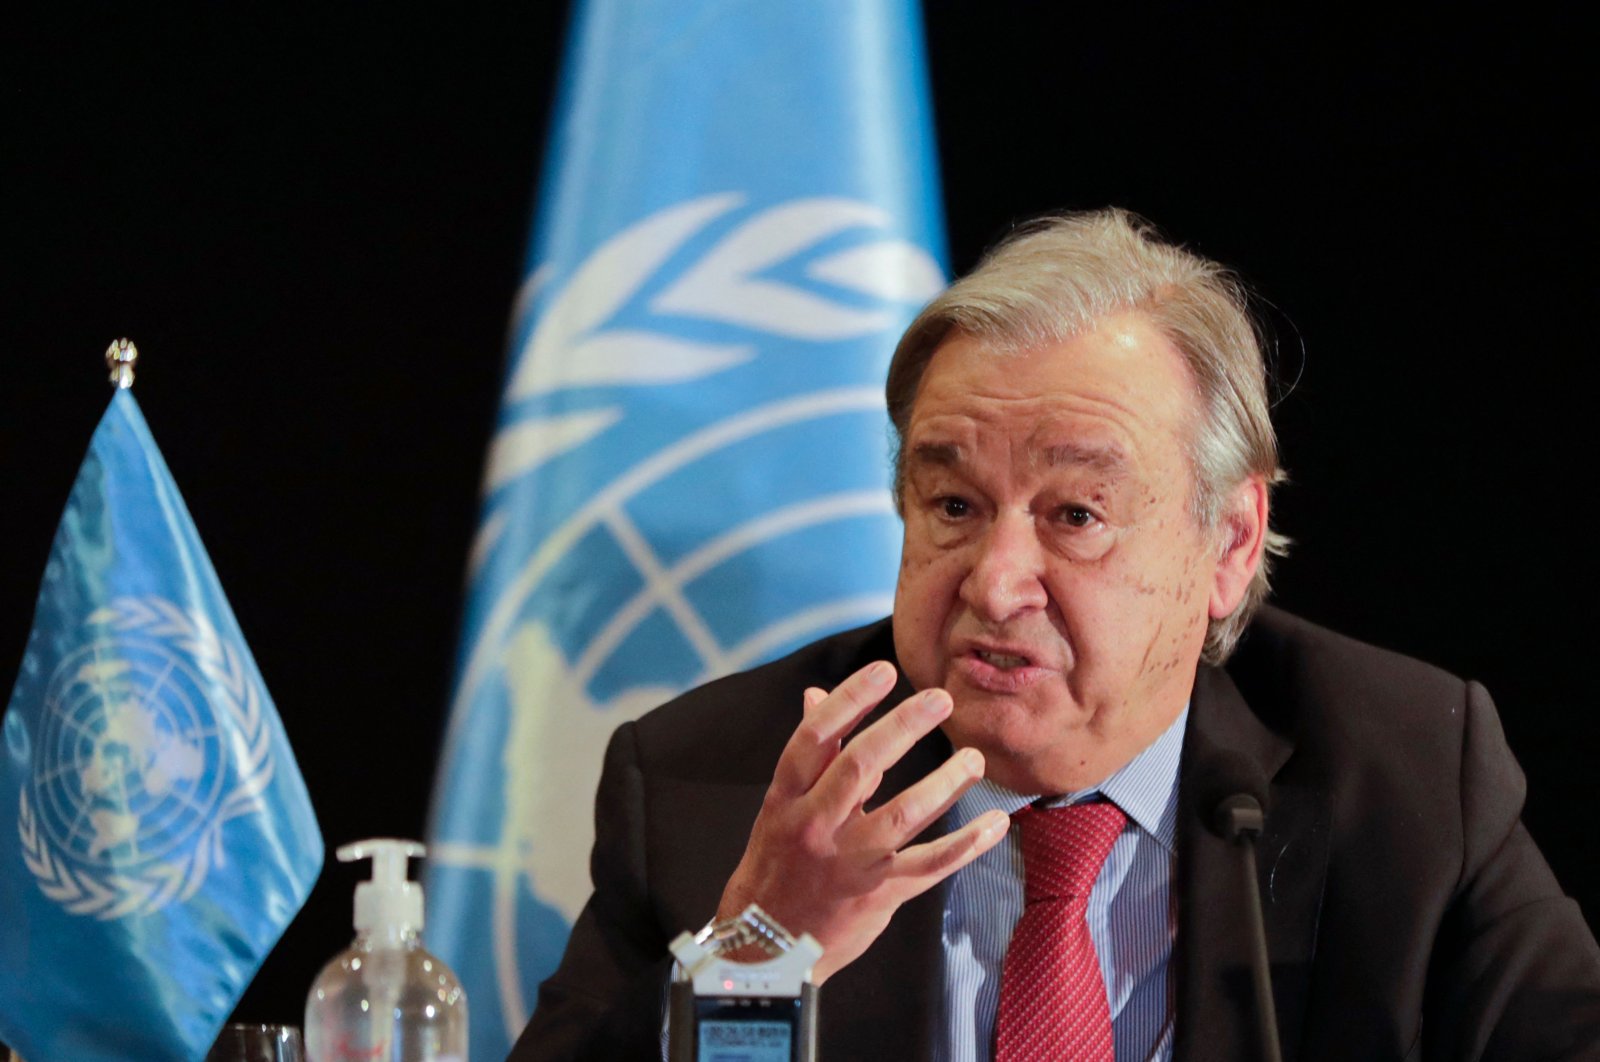 UN Secretary-General Antonio Guterres attends a press conference at the end of his visit to Lebanon, in the capital Beirut, Dec. 21, 2021. (AFP File Photo)